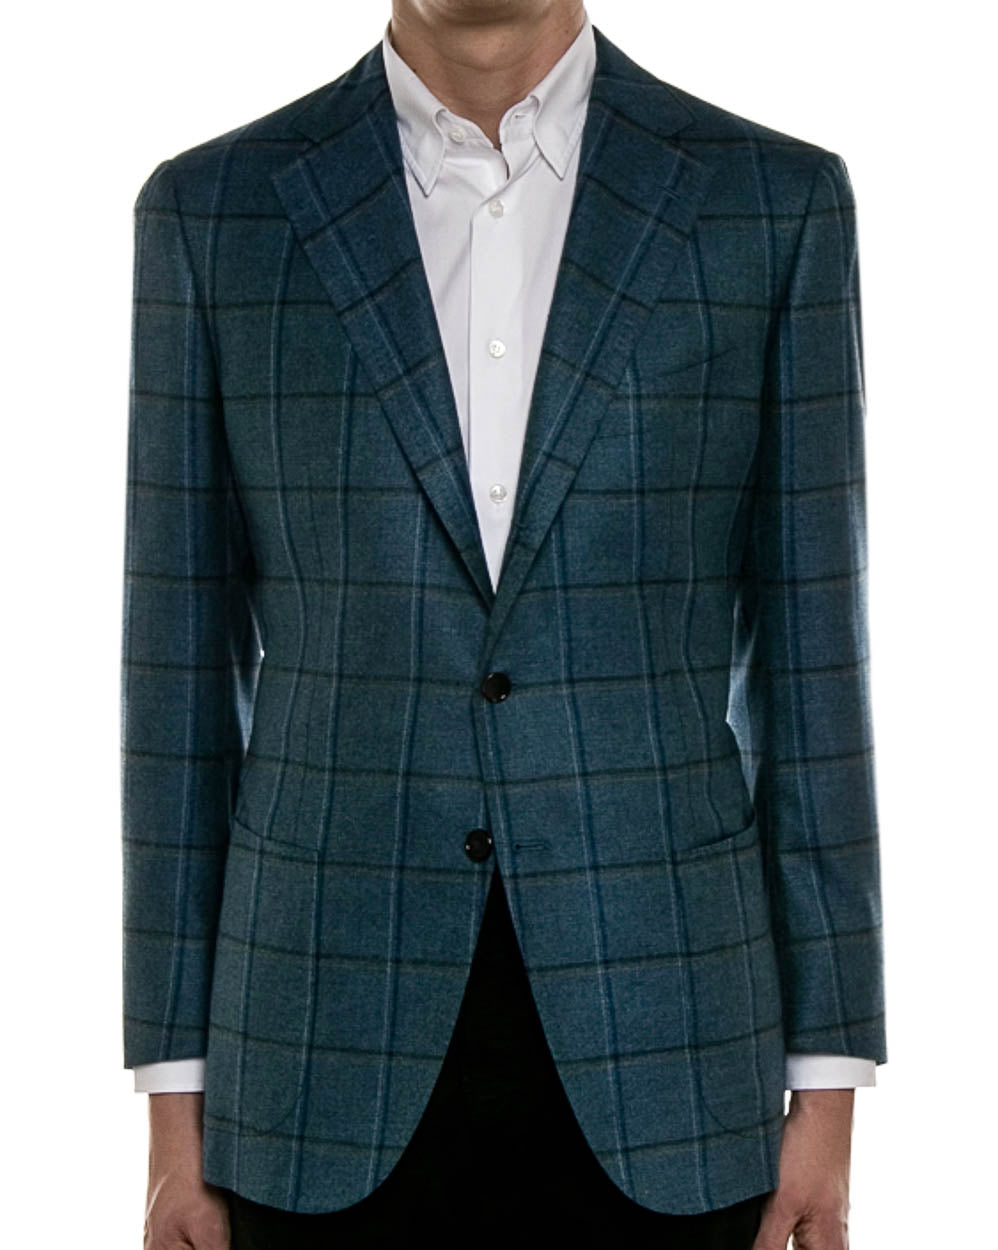 Dark Teal with Tan and Blue Overcheck Sportcoat